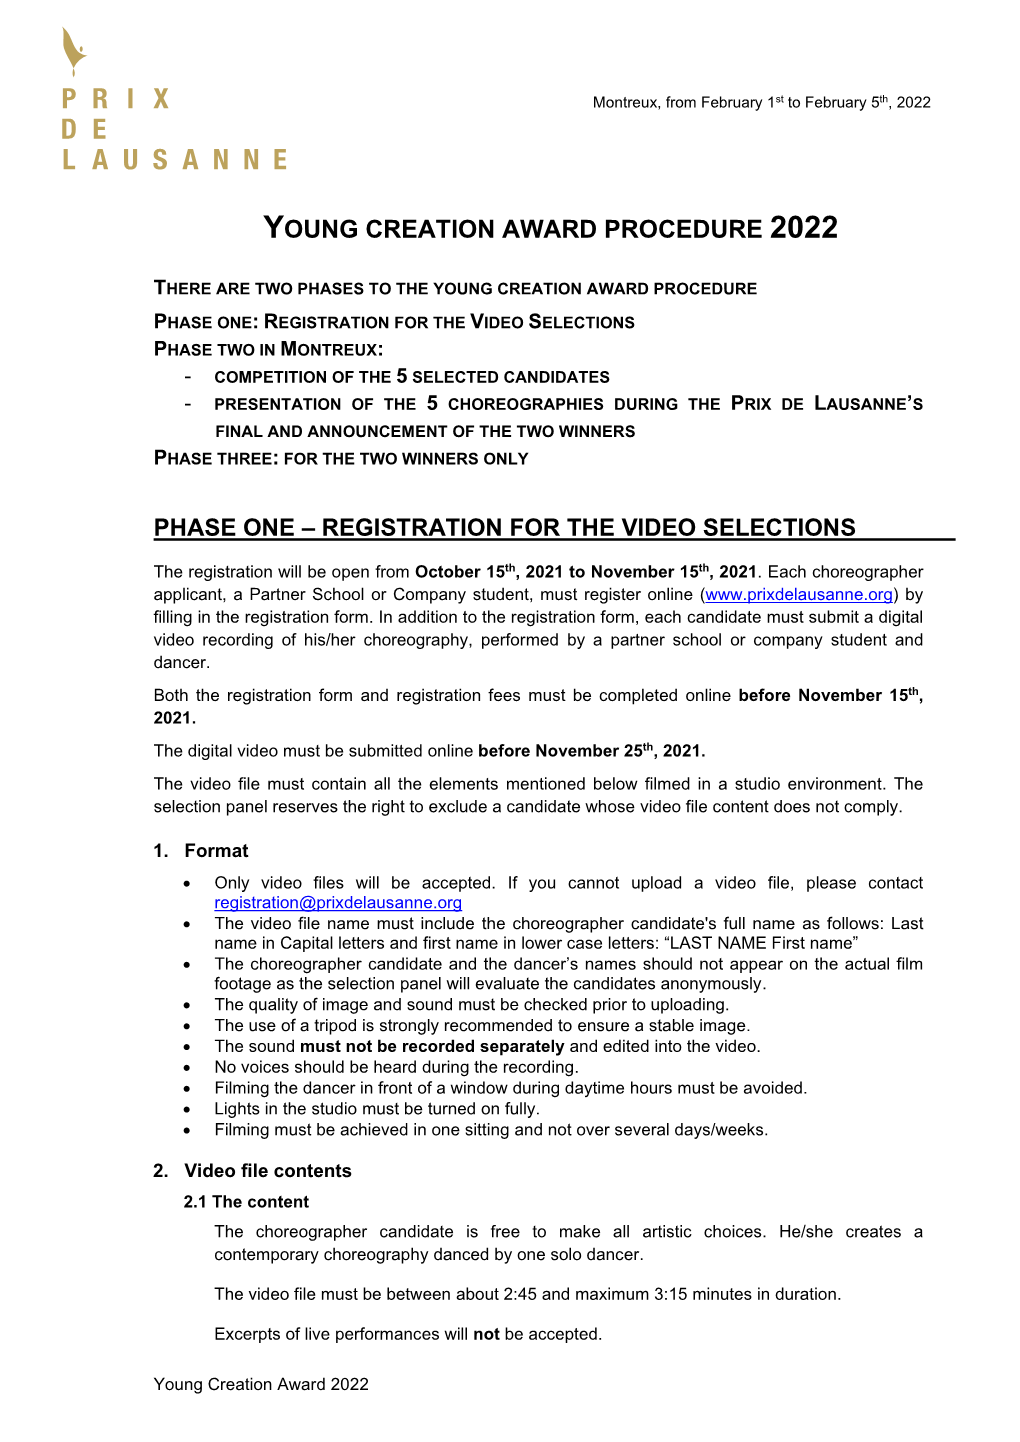 Young Creation Award Procedure 2022 Phase